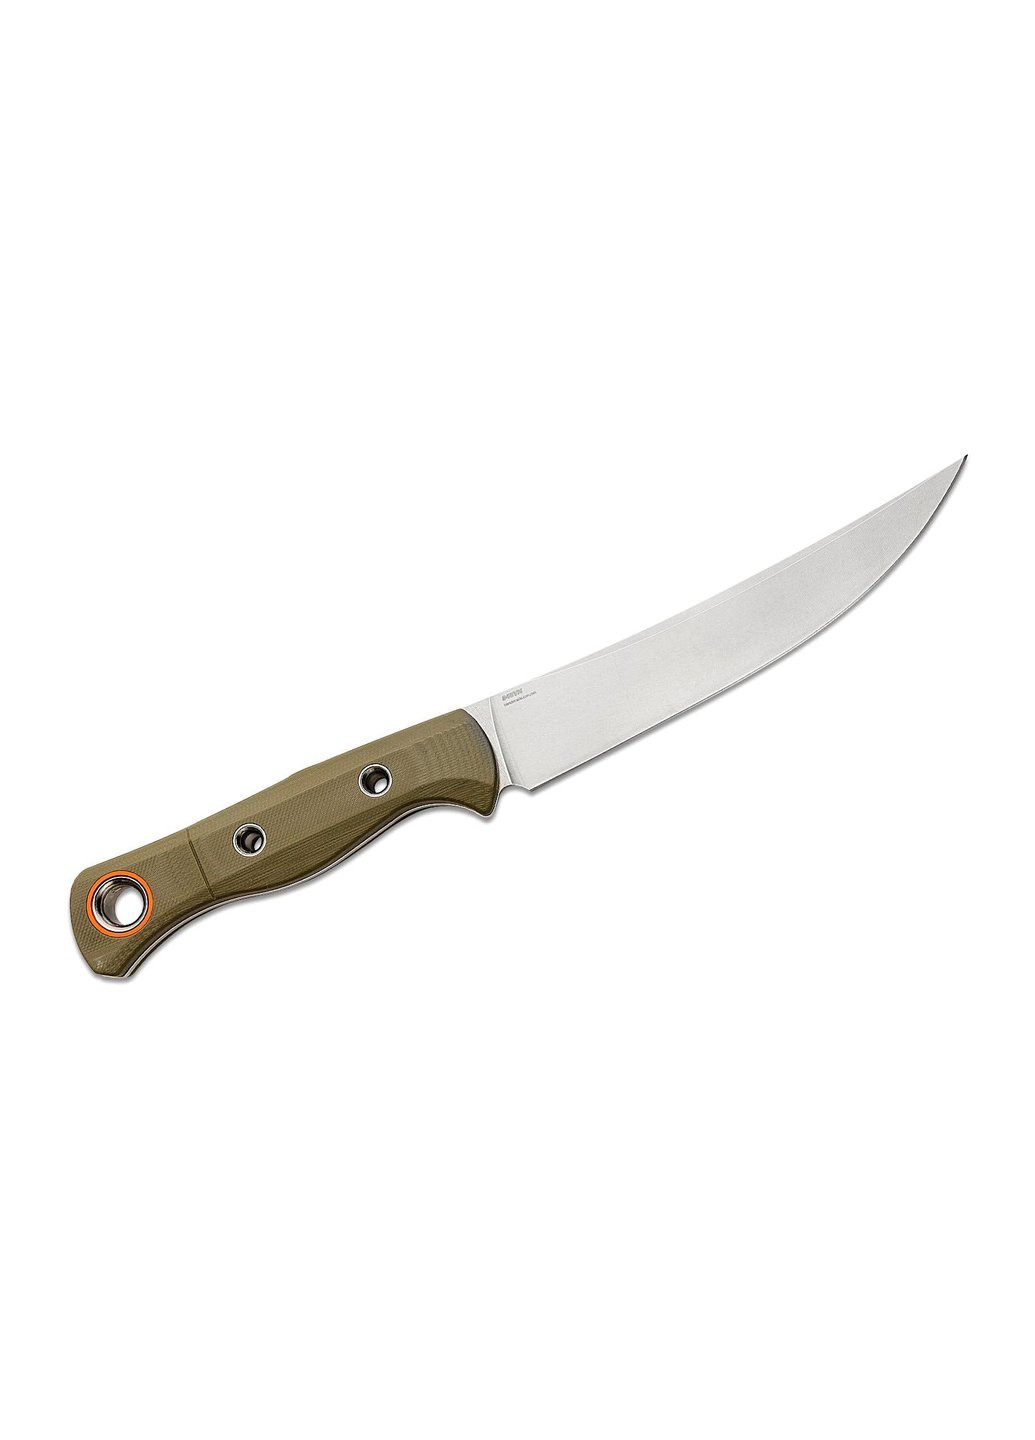 Нож Meatcrafter Olive G10 (15500-3) Benchmade (257223663)